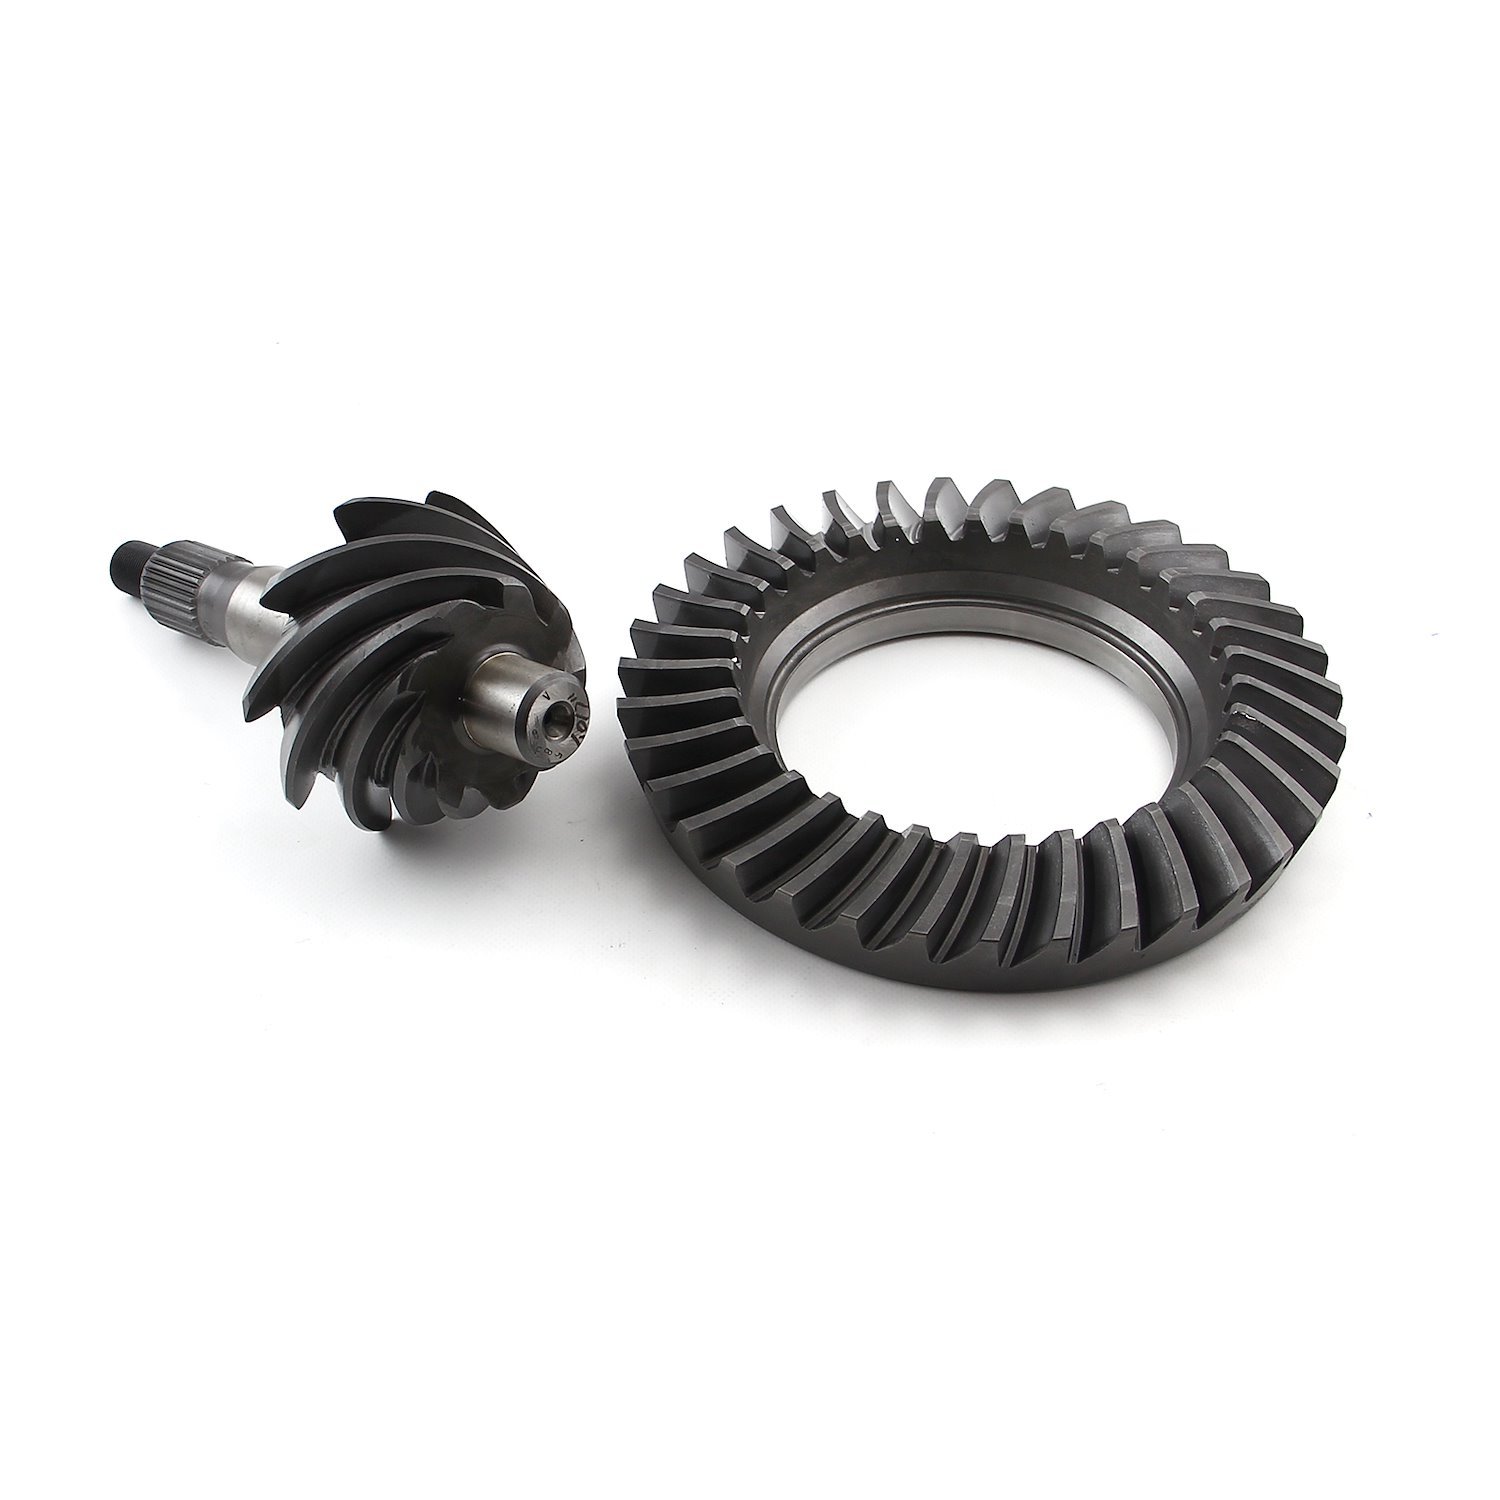 4.30 28 Spline Ford 9 Ring and Pinion Set 8620